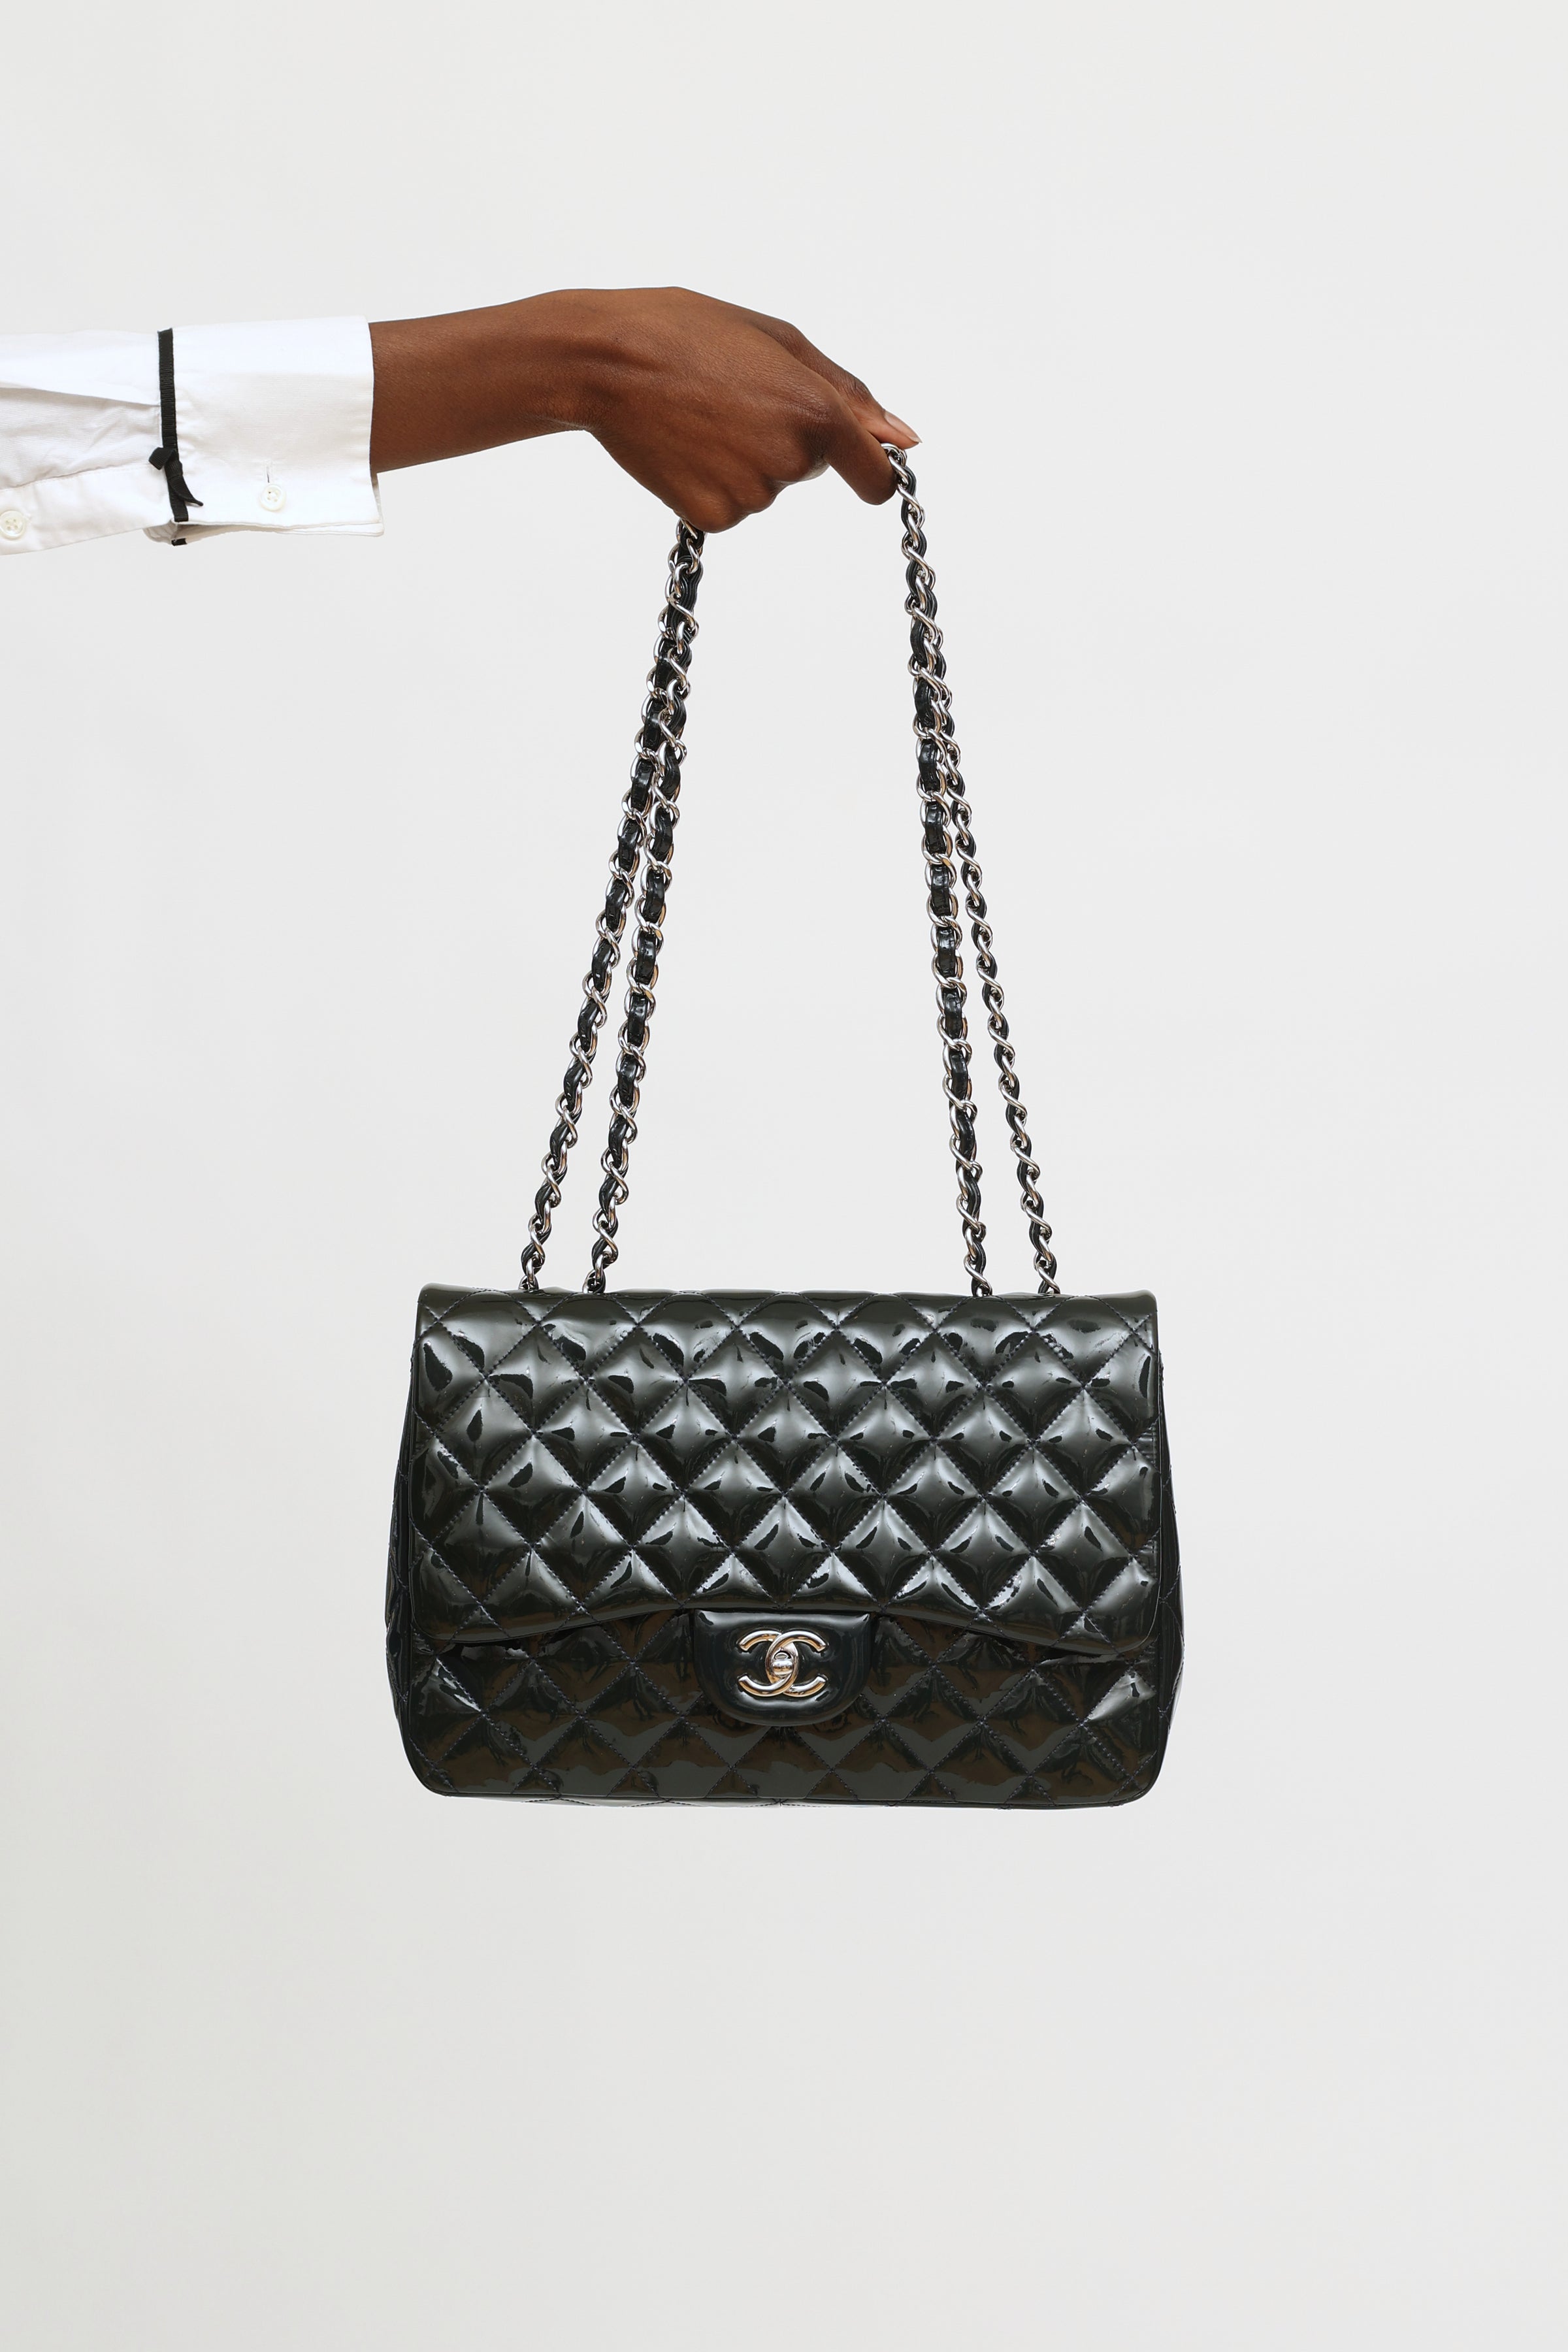 Chanel Timeless White Caviar Leather Shoulder Bag